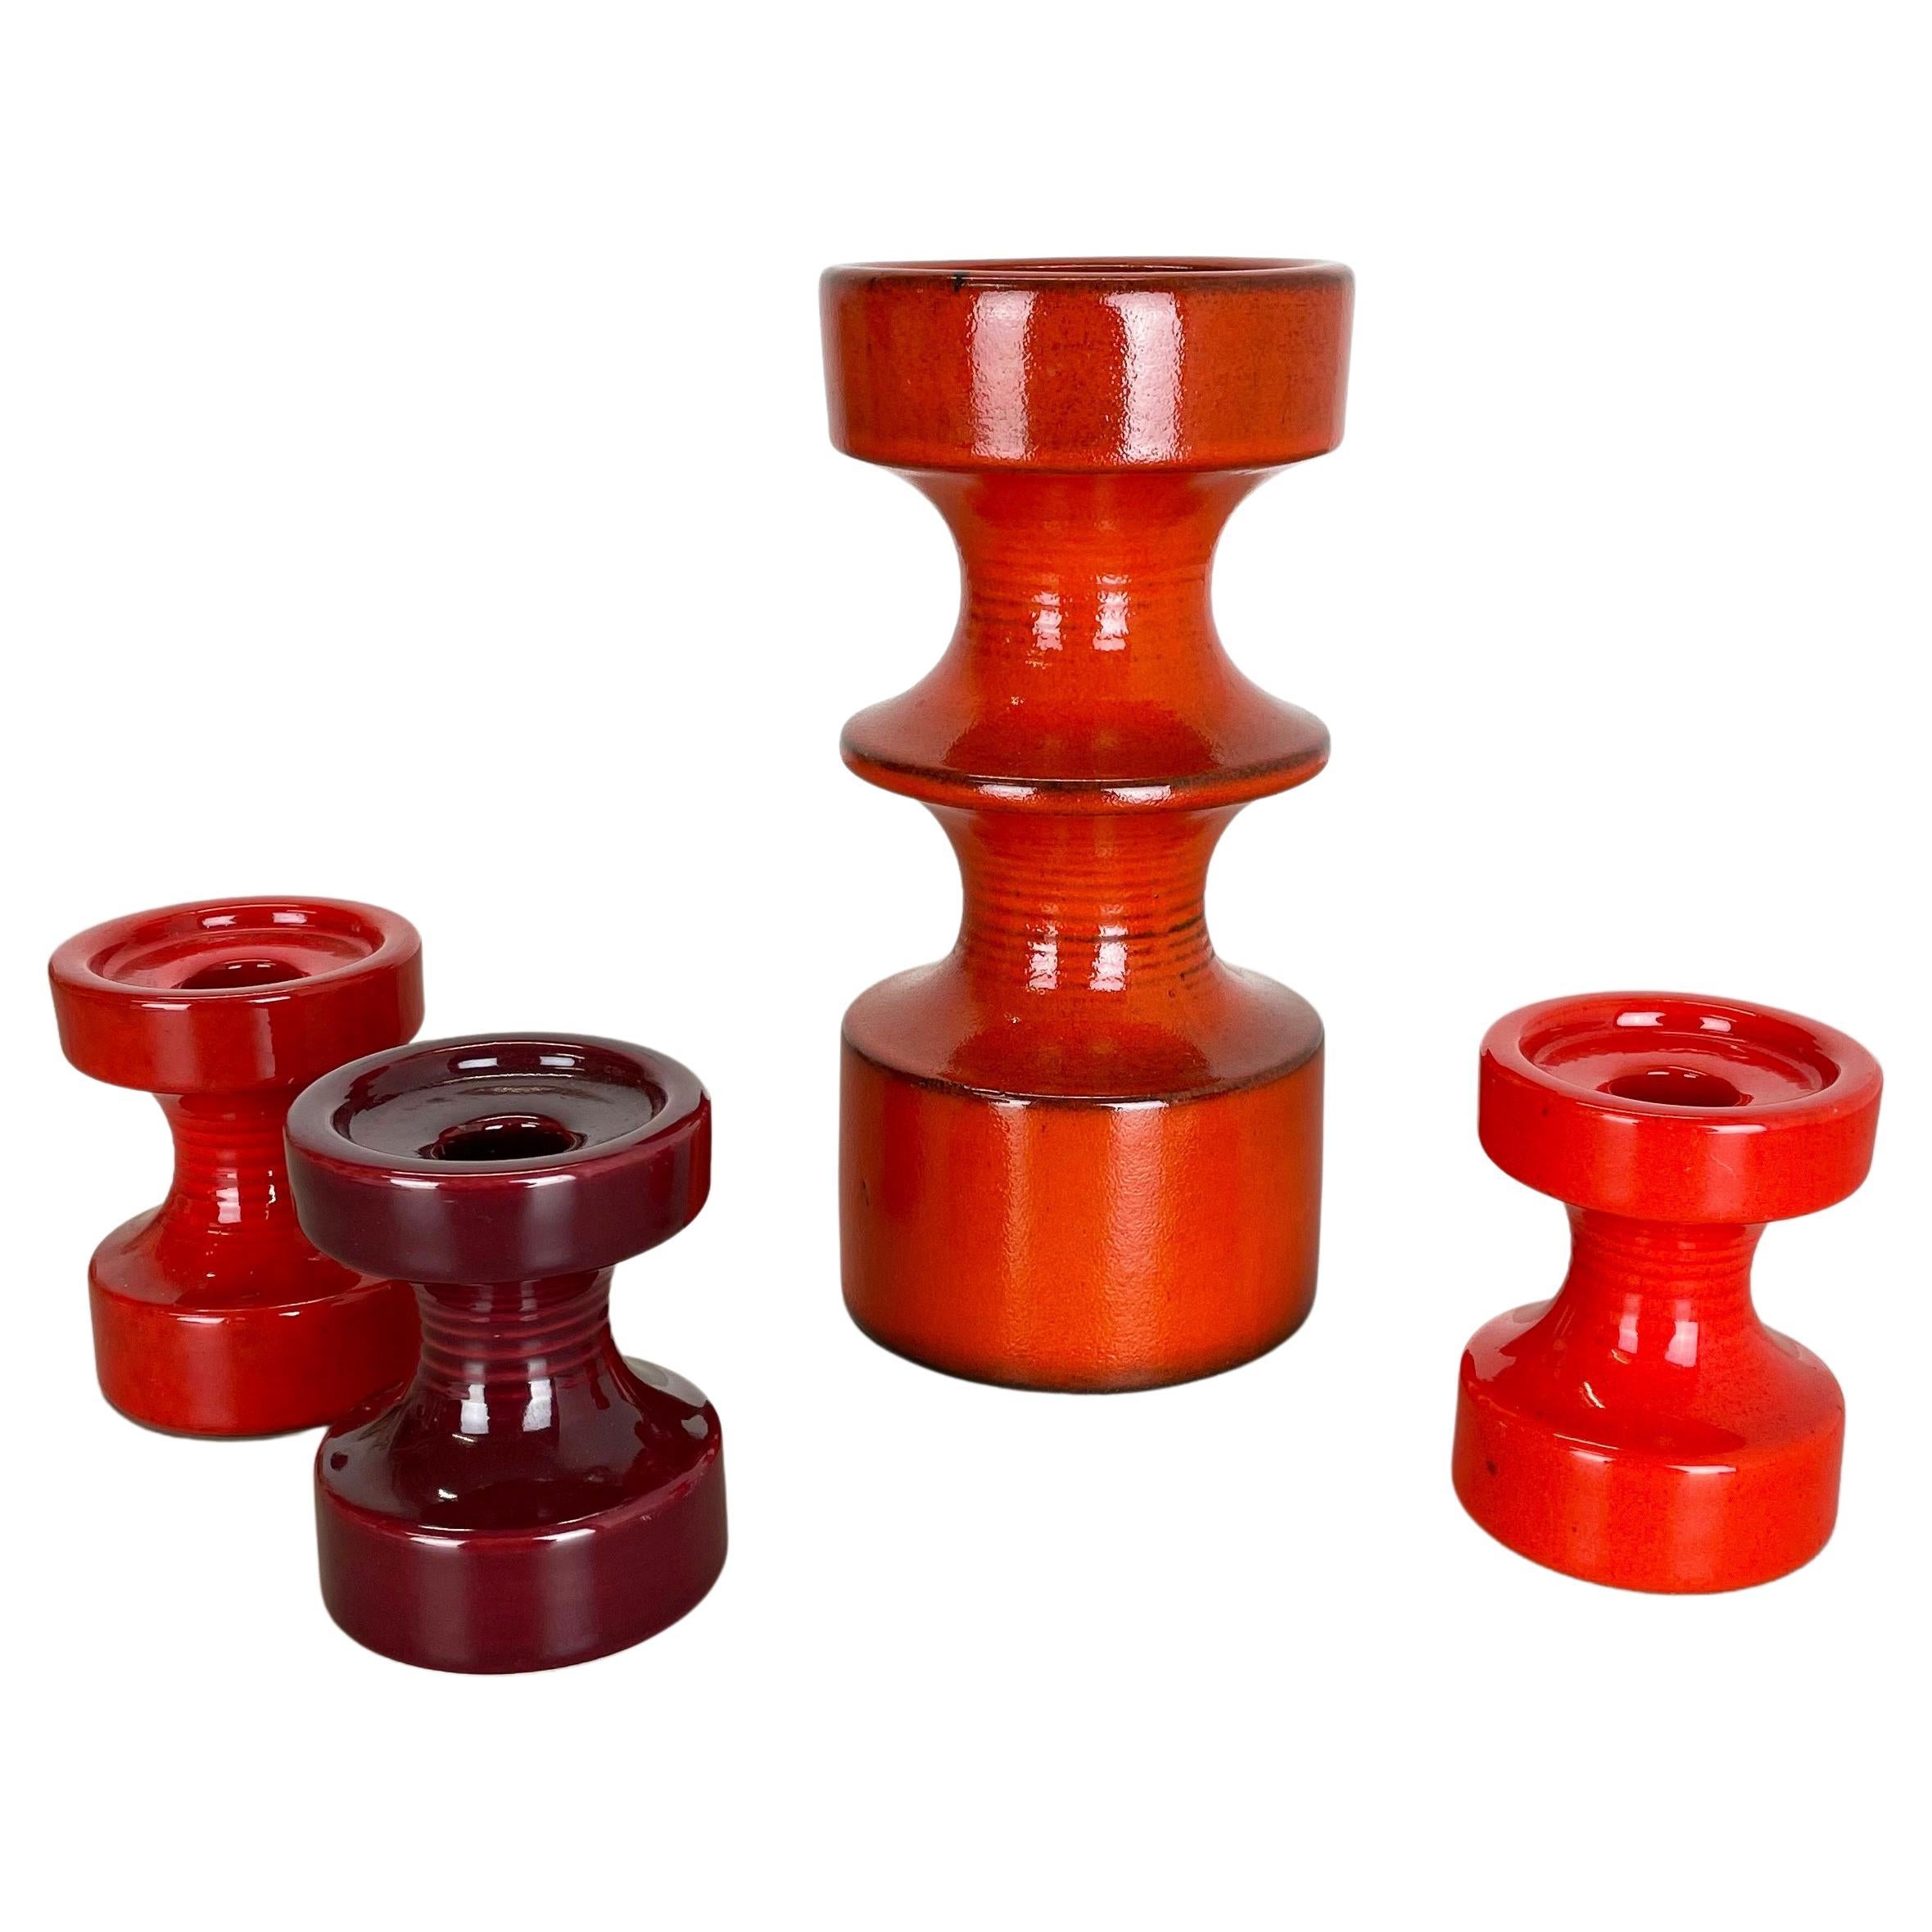 Set of Four Pottery Candleholder by Cari Zalloni for Steuler, Germany, 1970s